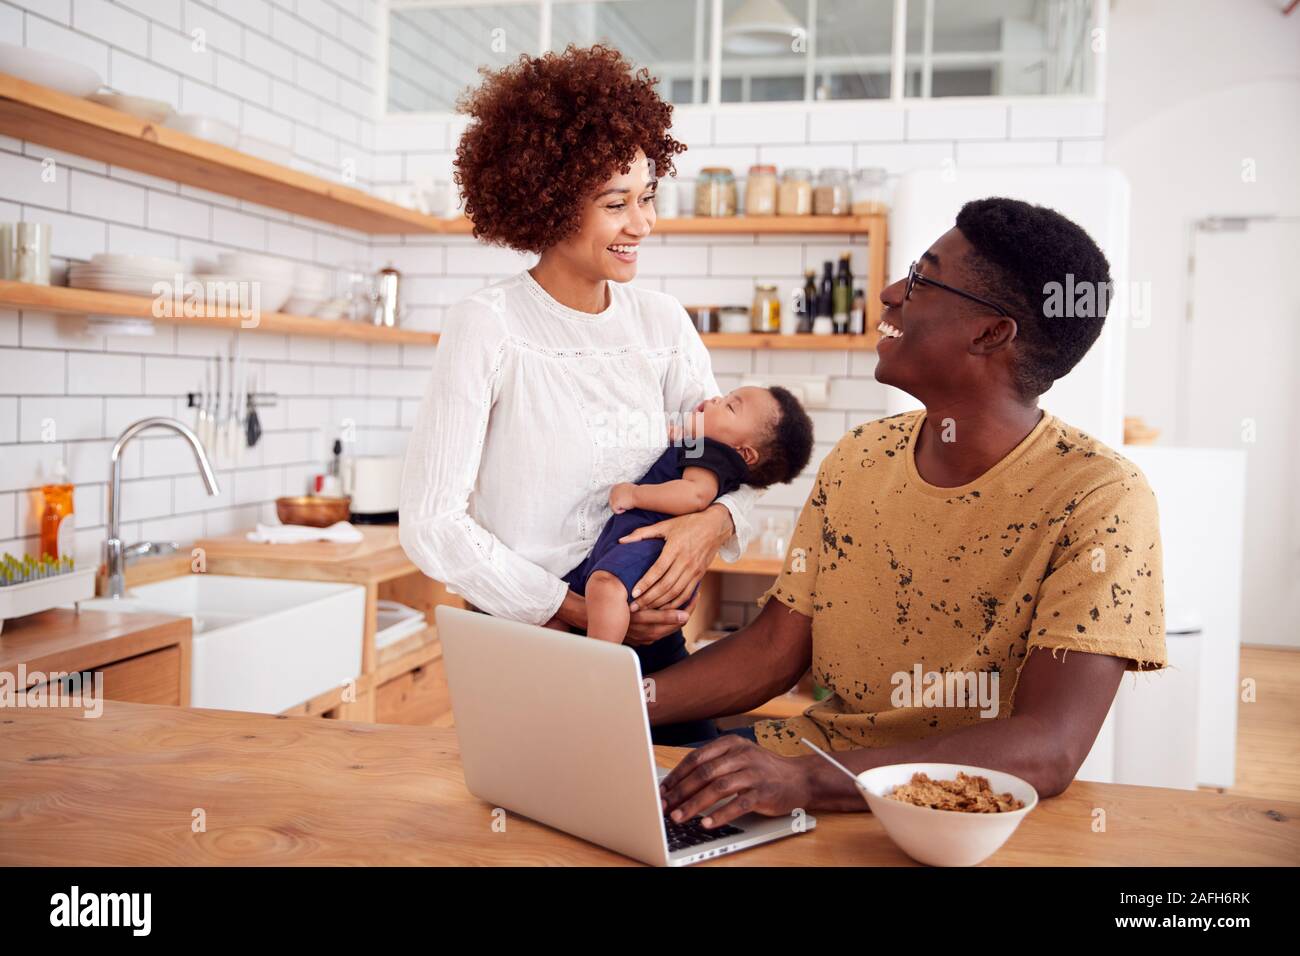 Busy Family In Kitchen At Breakfast With Father Caring For Baby Son Stock Photo